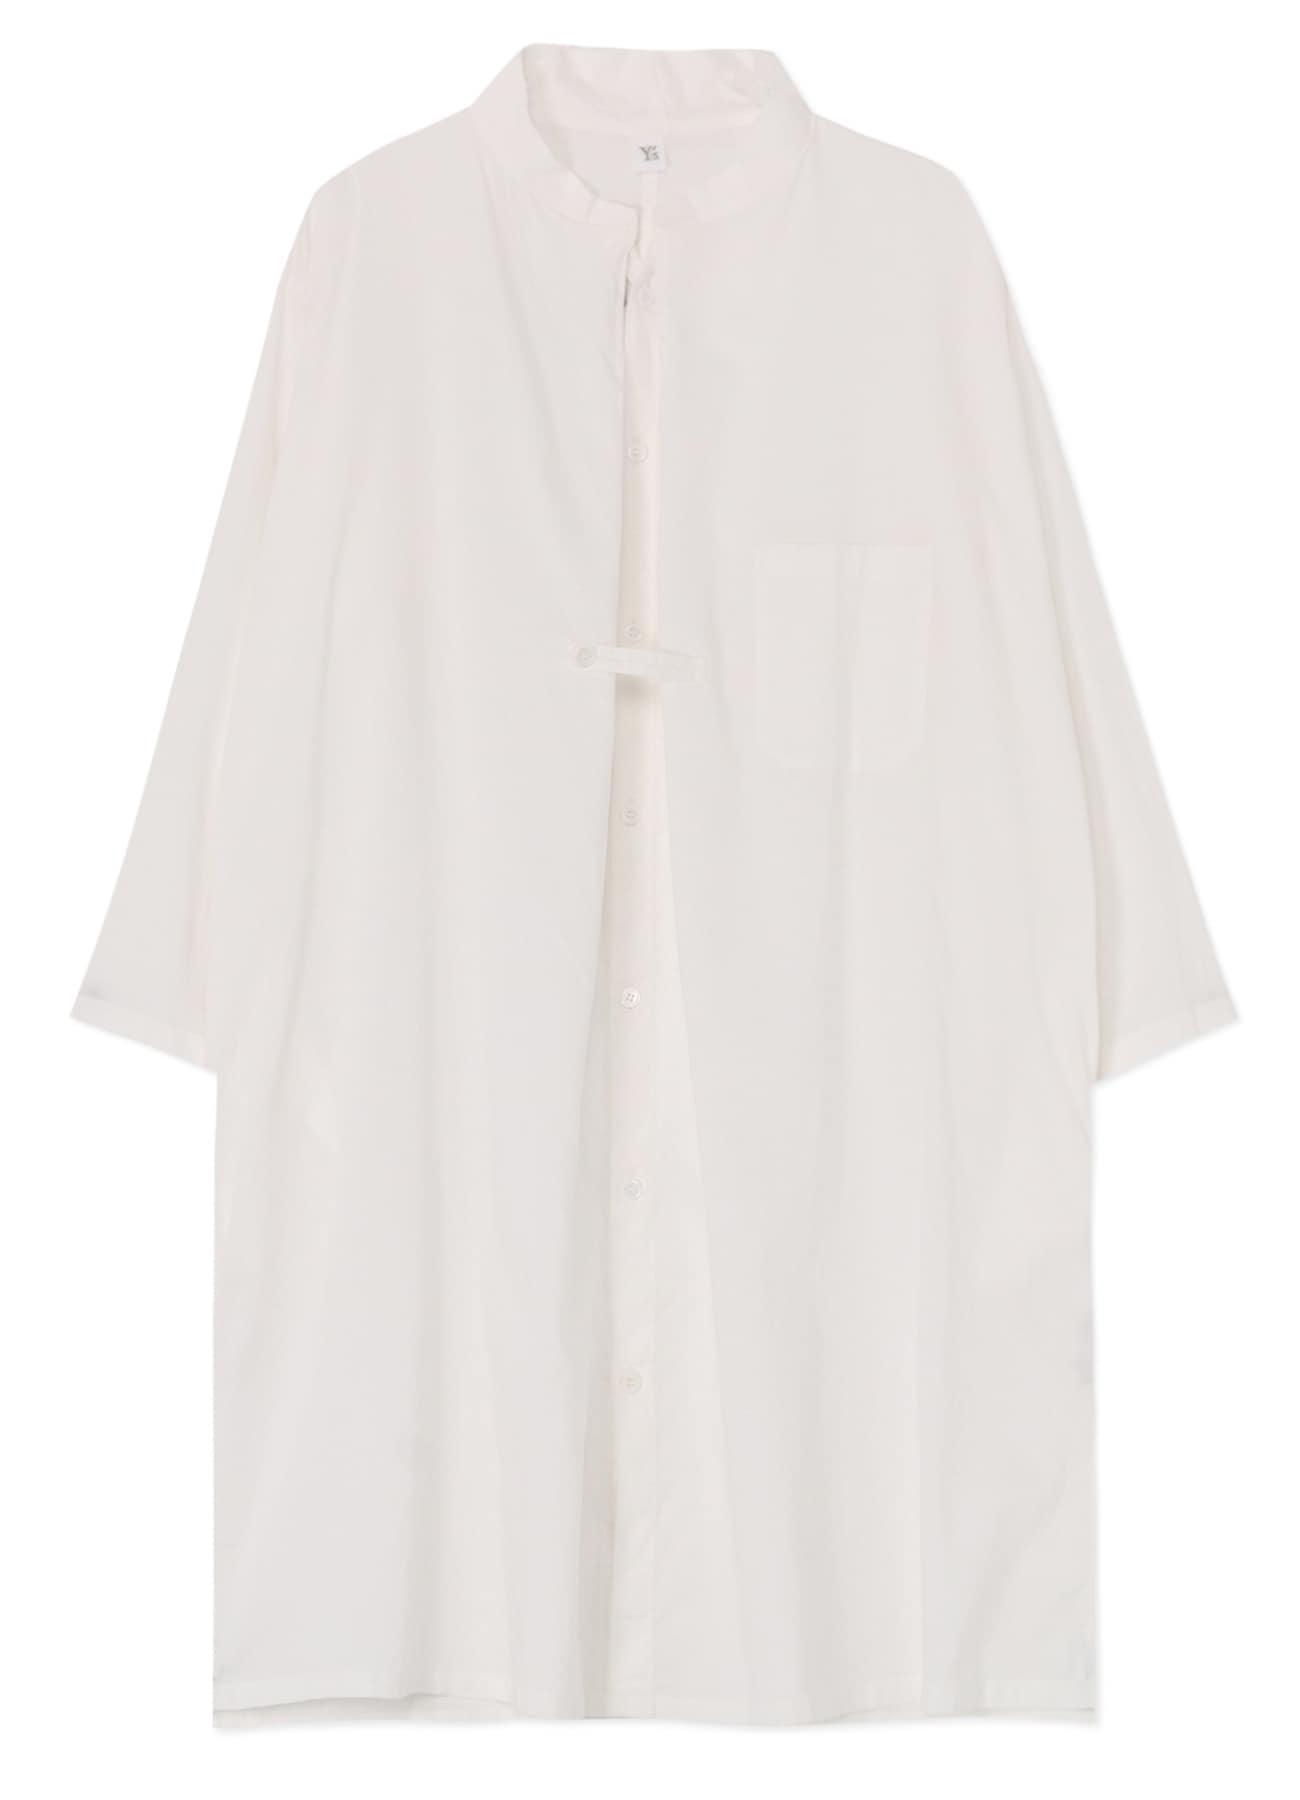 THIN COTTON TWILL PLEATED SHIRT DRESS(XS White): Y's｜THE SHOP 